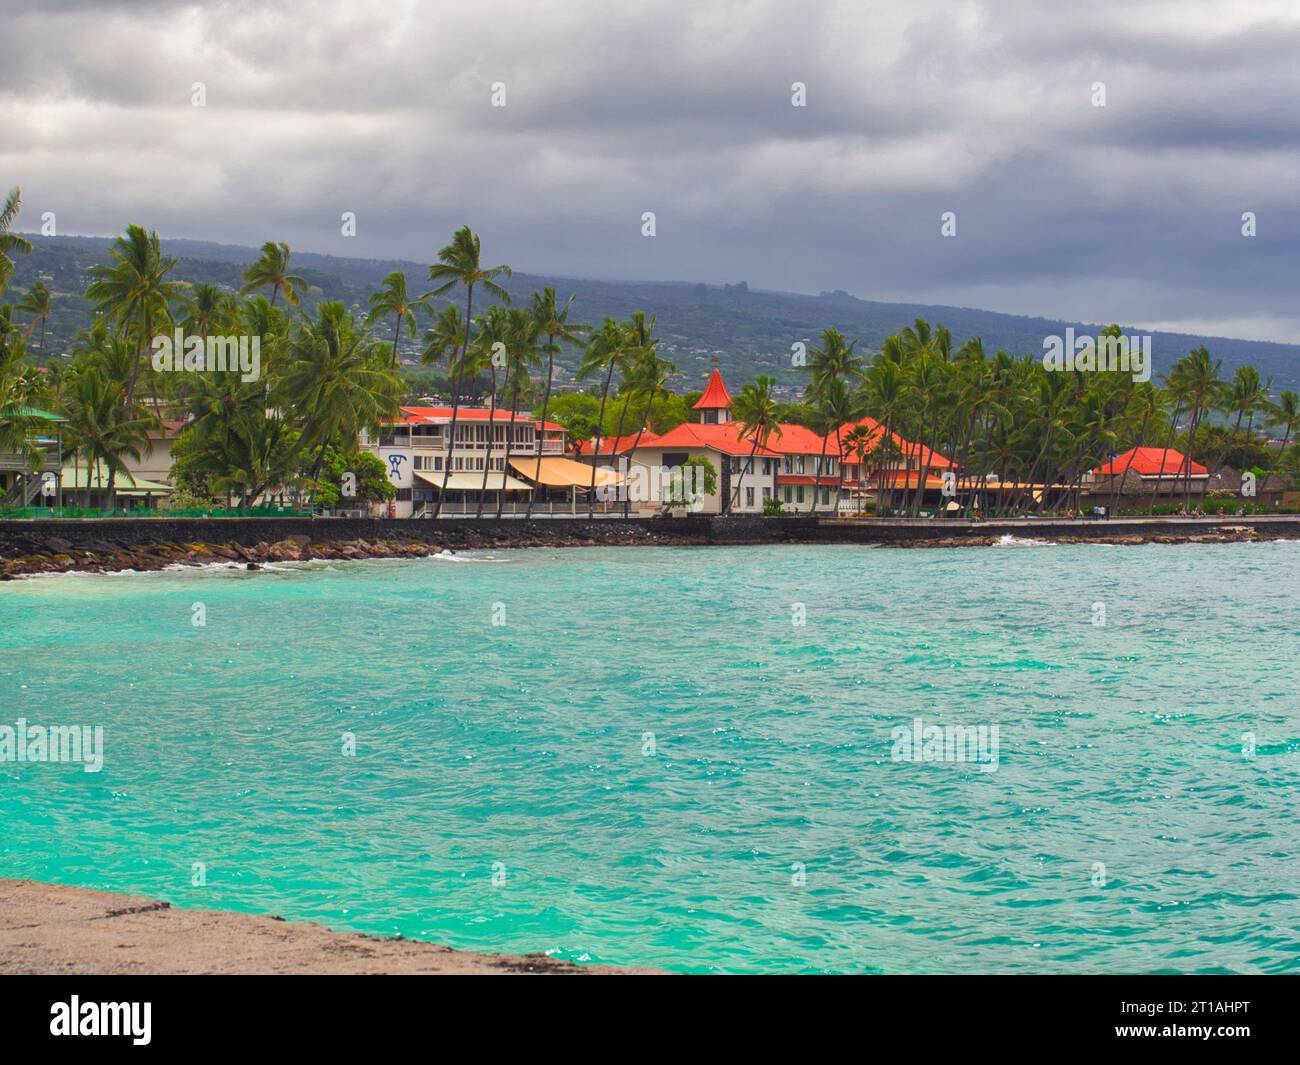 Ocean with very blue water looking over Kailua-Kona downtown with palm trees and red roofs. Storm clouds move in from behind the town. Stock Photo